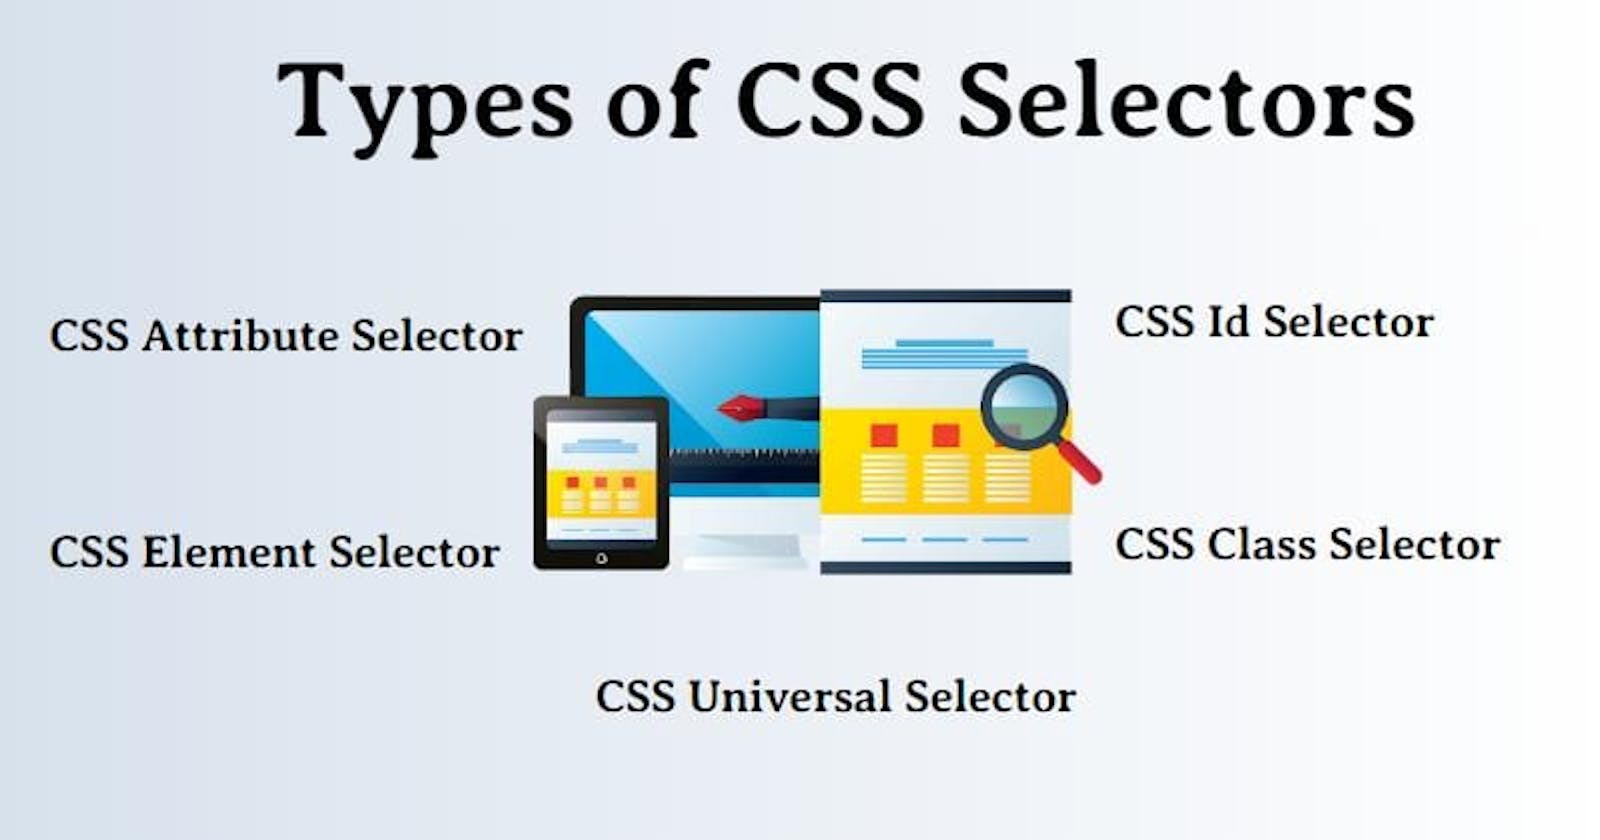 CSS and it's Selectors